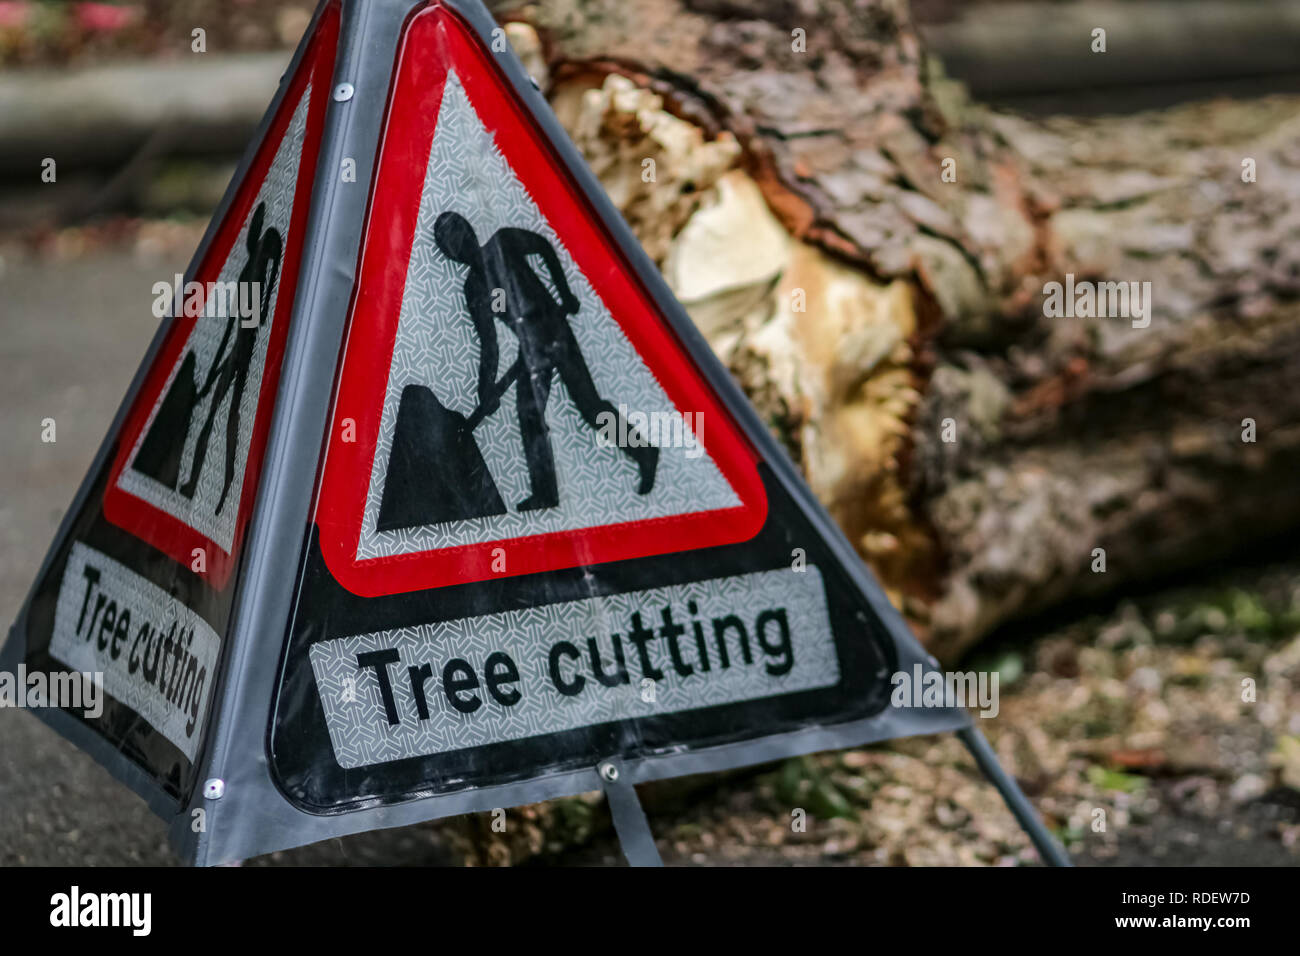 Warning sign Tree Cutting and the cut tree in background at the park, photographed with shallow depth of field. Stock Photo